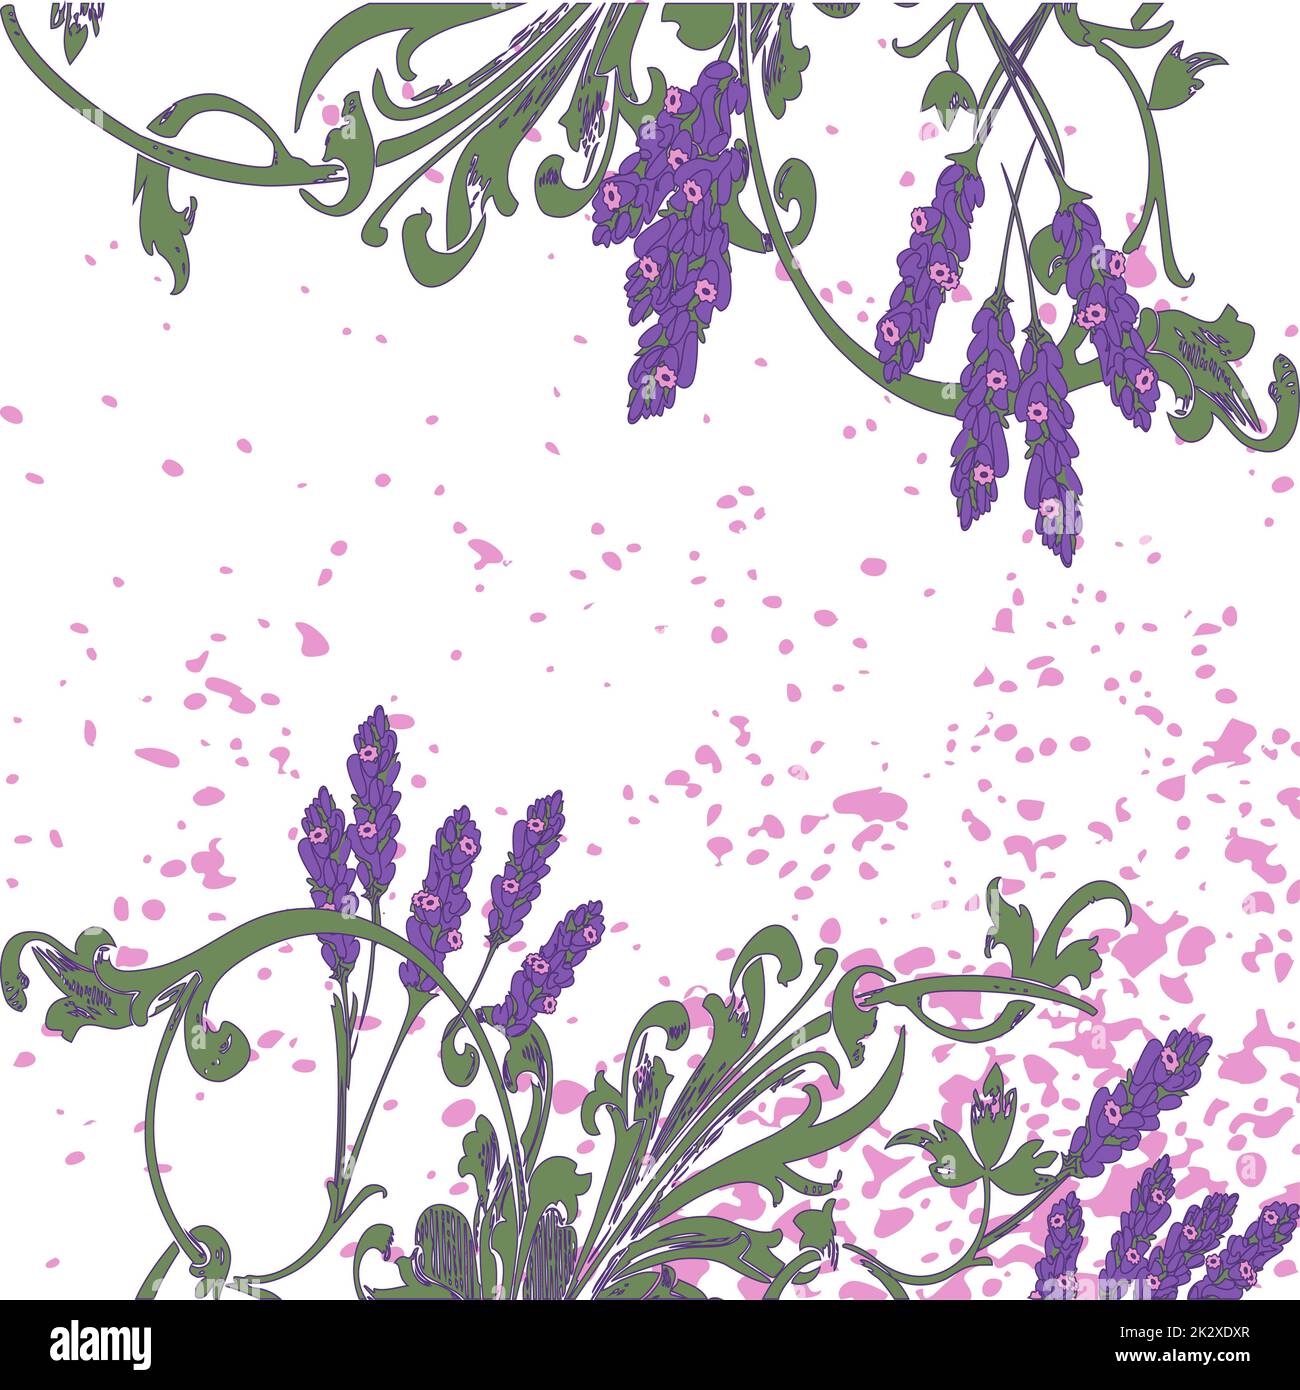 Hand drawn lavender flowers on white, abstract floral pattern cover design. Blossom greenery branches, trendy artistic background. Graphic vector illustration wedding, poster, greeting card, magazine Stock Photo